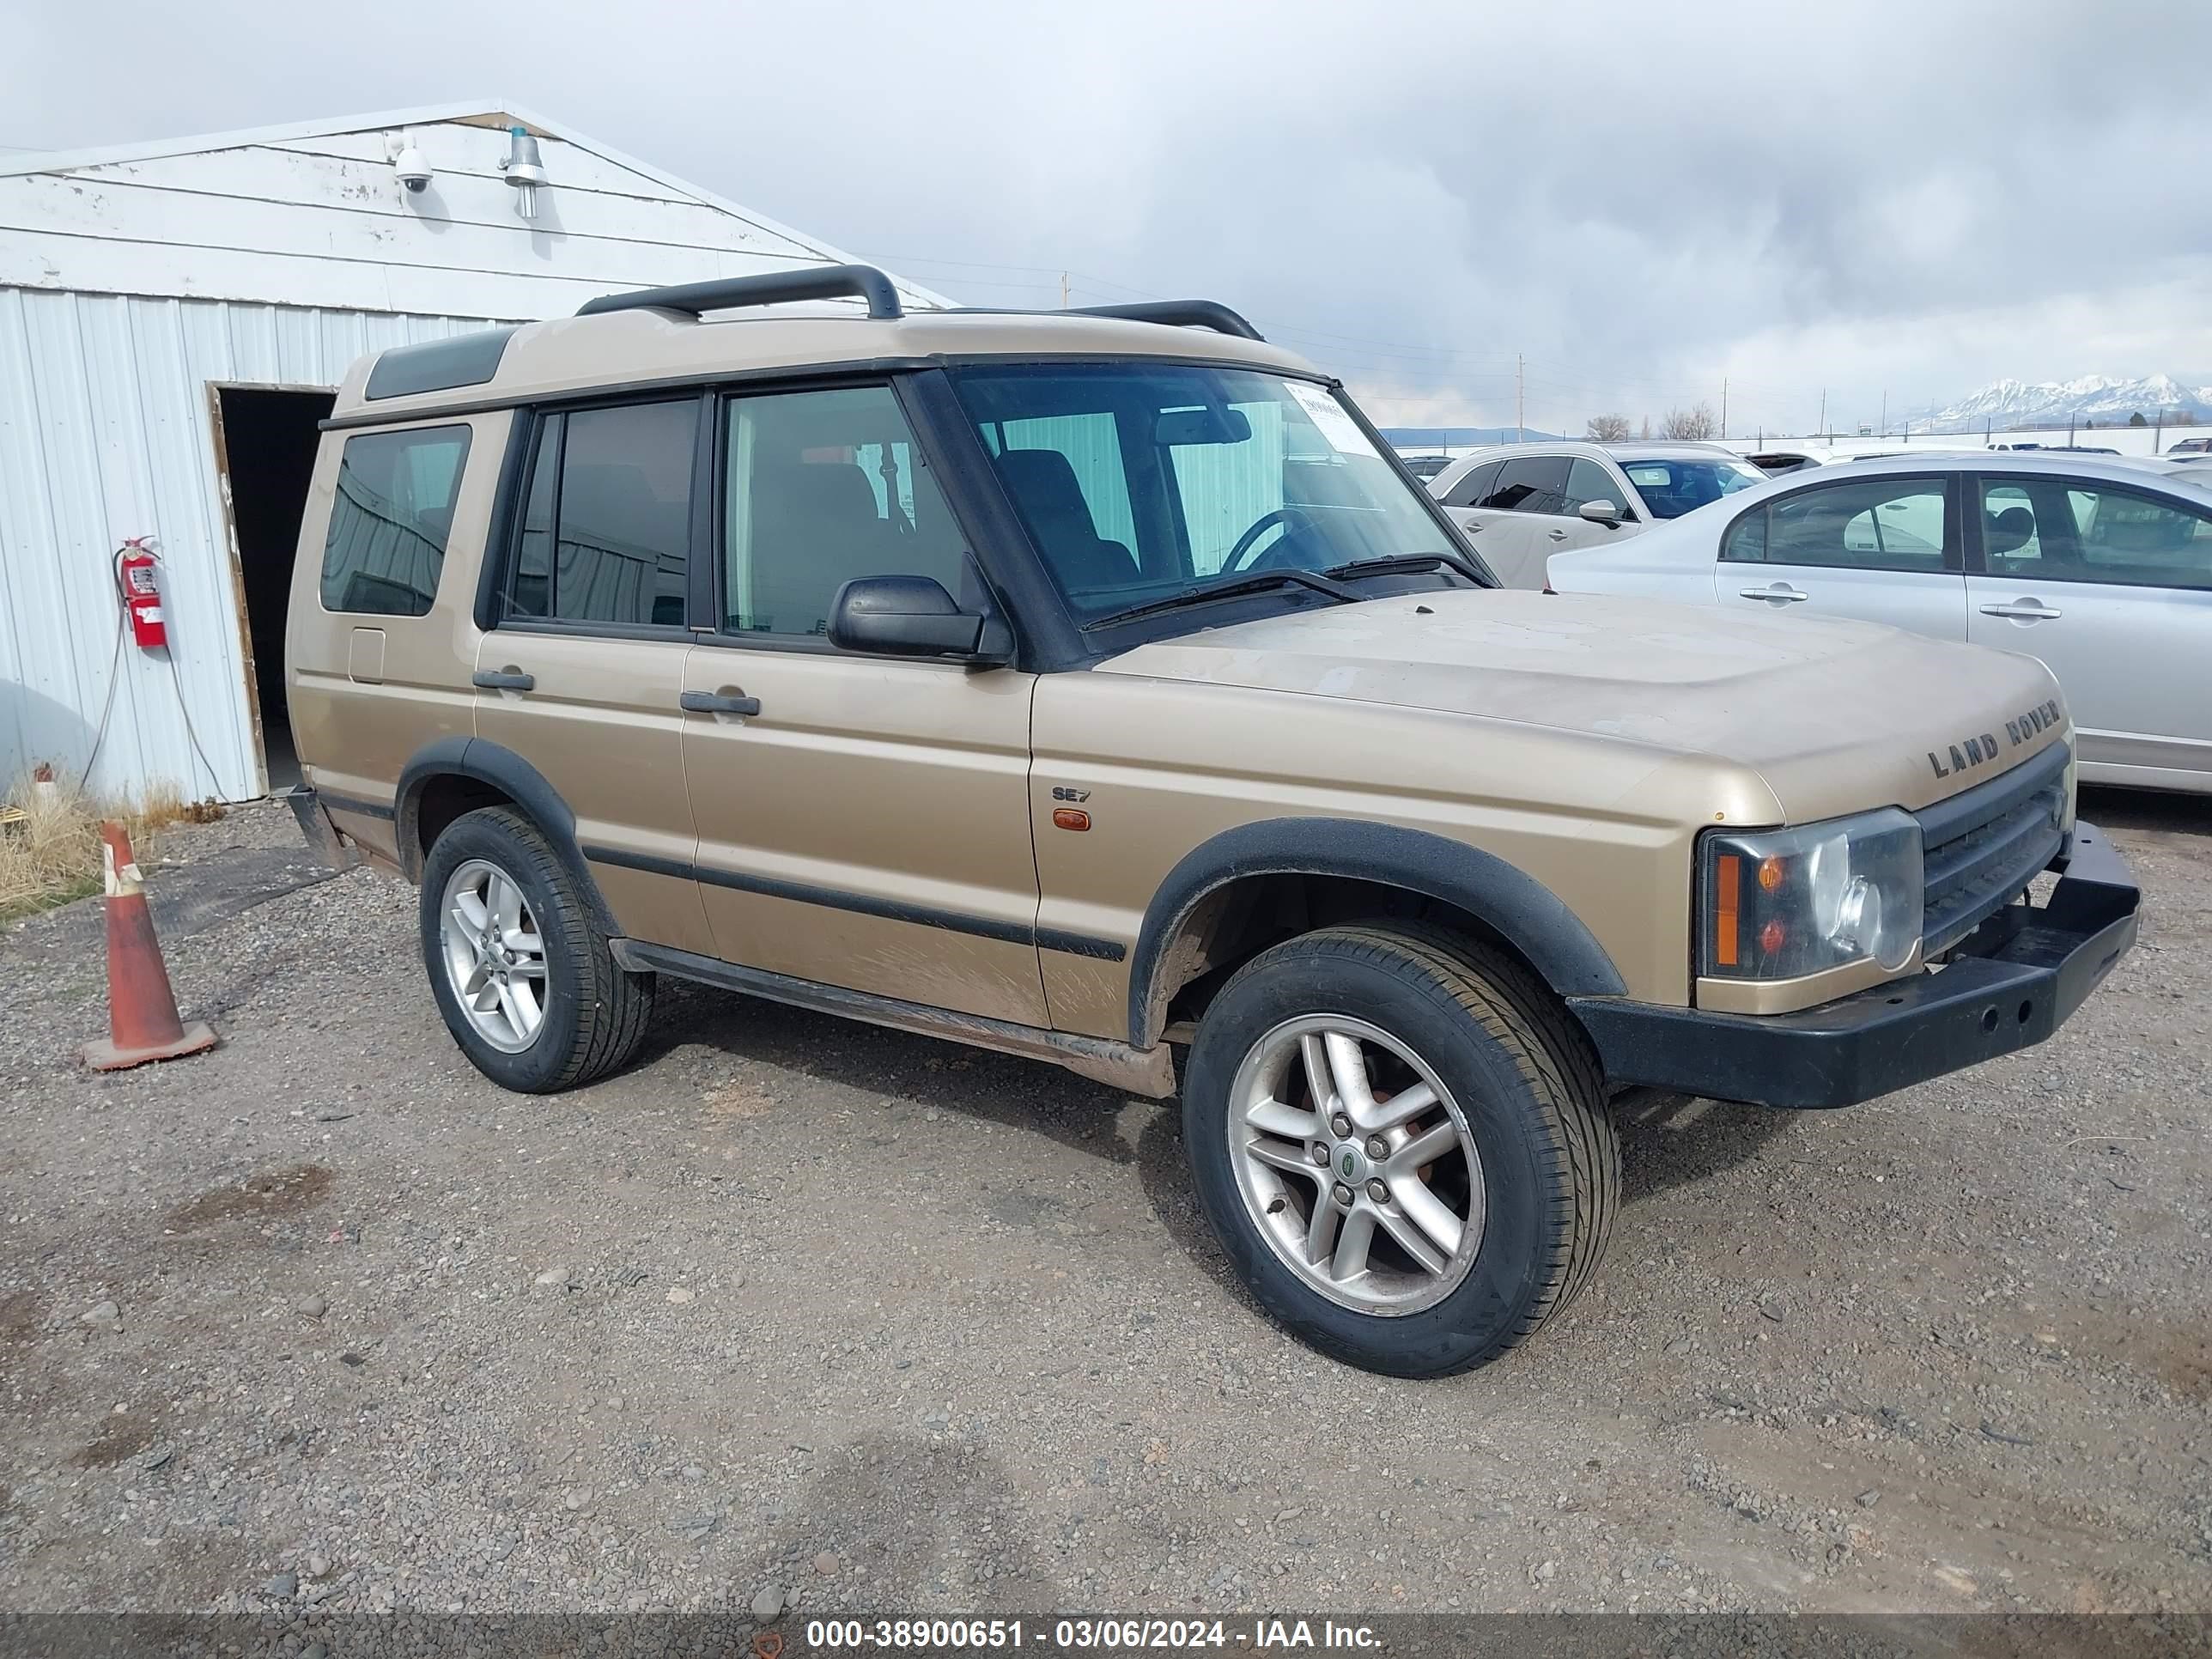 VIN: SALTW19454A865188 - land rover discovery